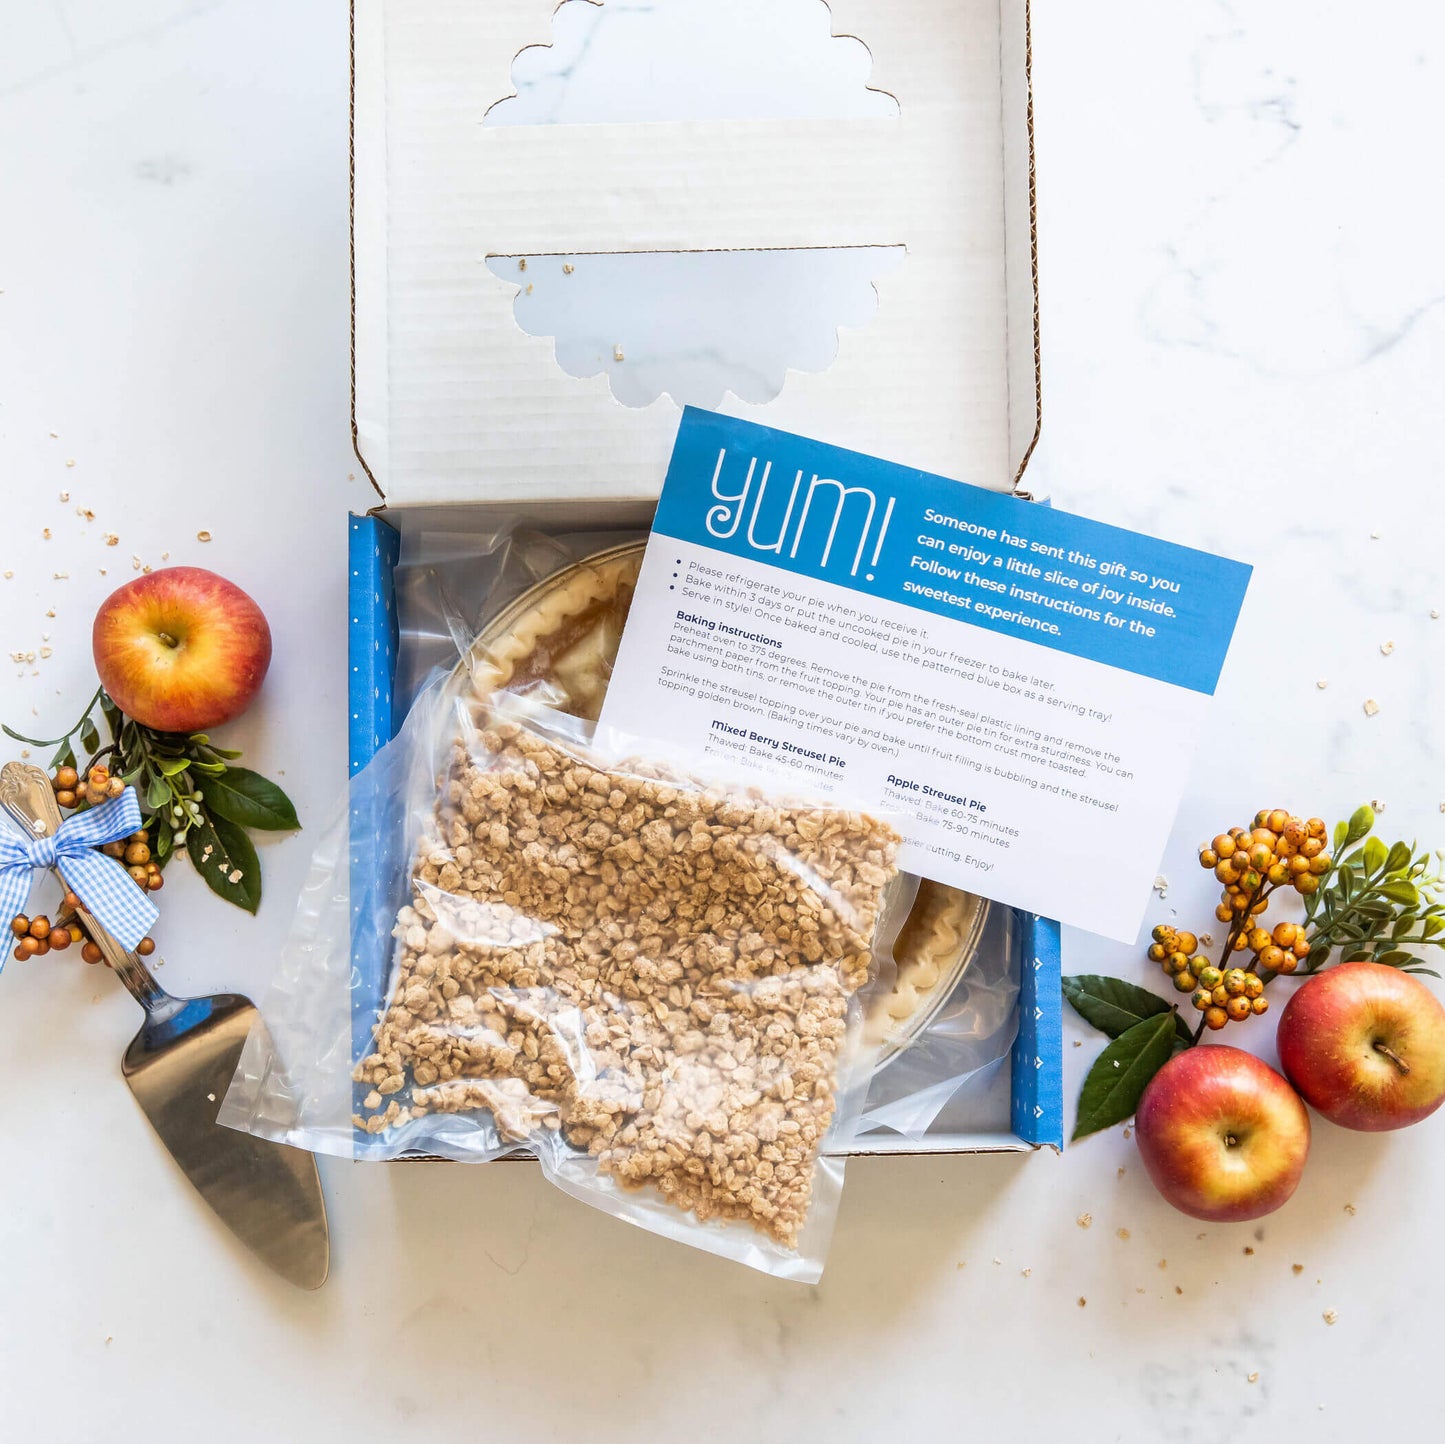 A Blue Ribbon apple streusel pie in the box